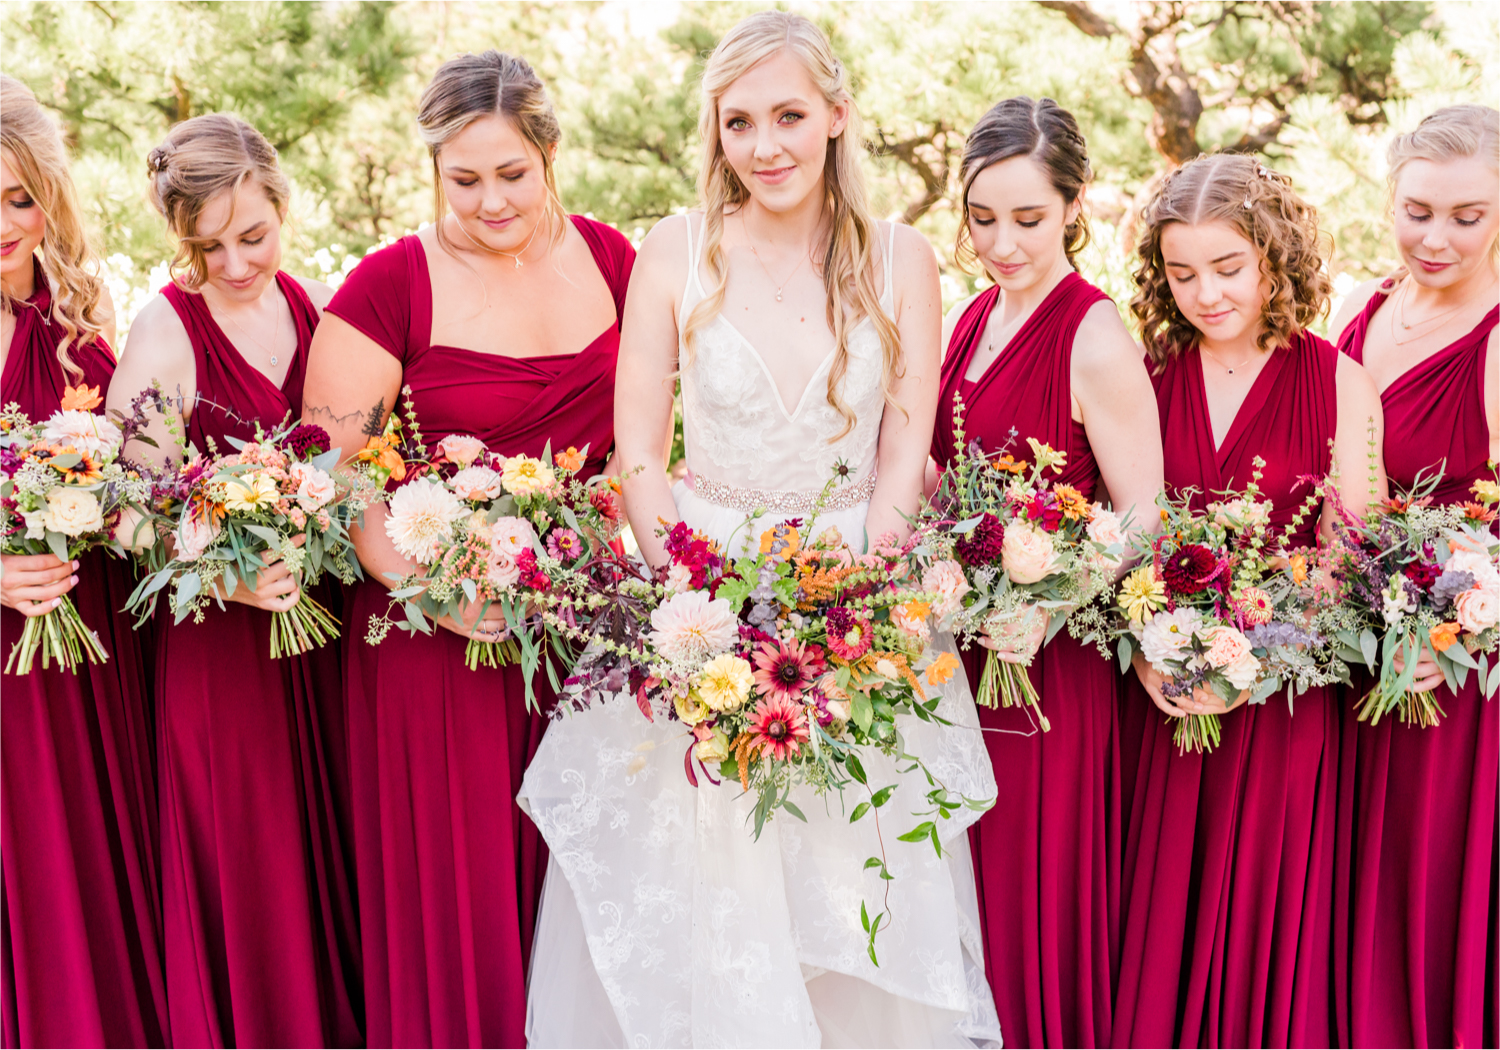 Romantic Whimsical Wedding at the Lionscrest Manor in Lyons, CO | Britni Girard Photography - Wedding Photo and Video Team | Rustic Fall Decor mixed in Burgundy, Blush, Gold and Sage | Wedding Dress from Anna Be Bridal by Hailey Paige | Hair and Makeup by Glam 5280 Chaundra Revier | Bride and Bridesmaids | Florals by Aflorae